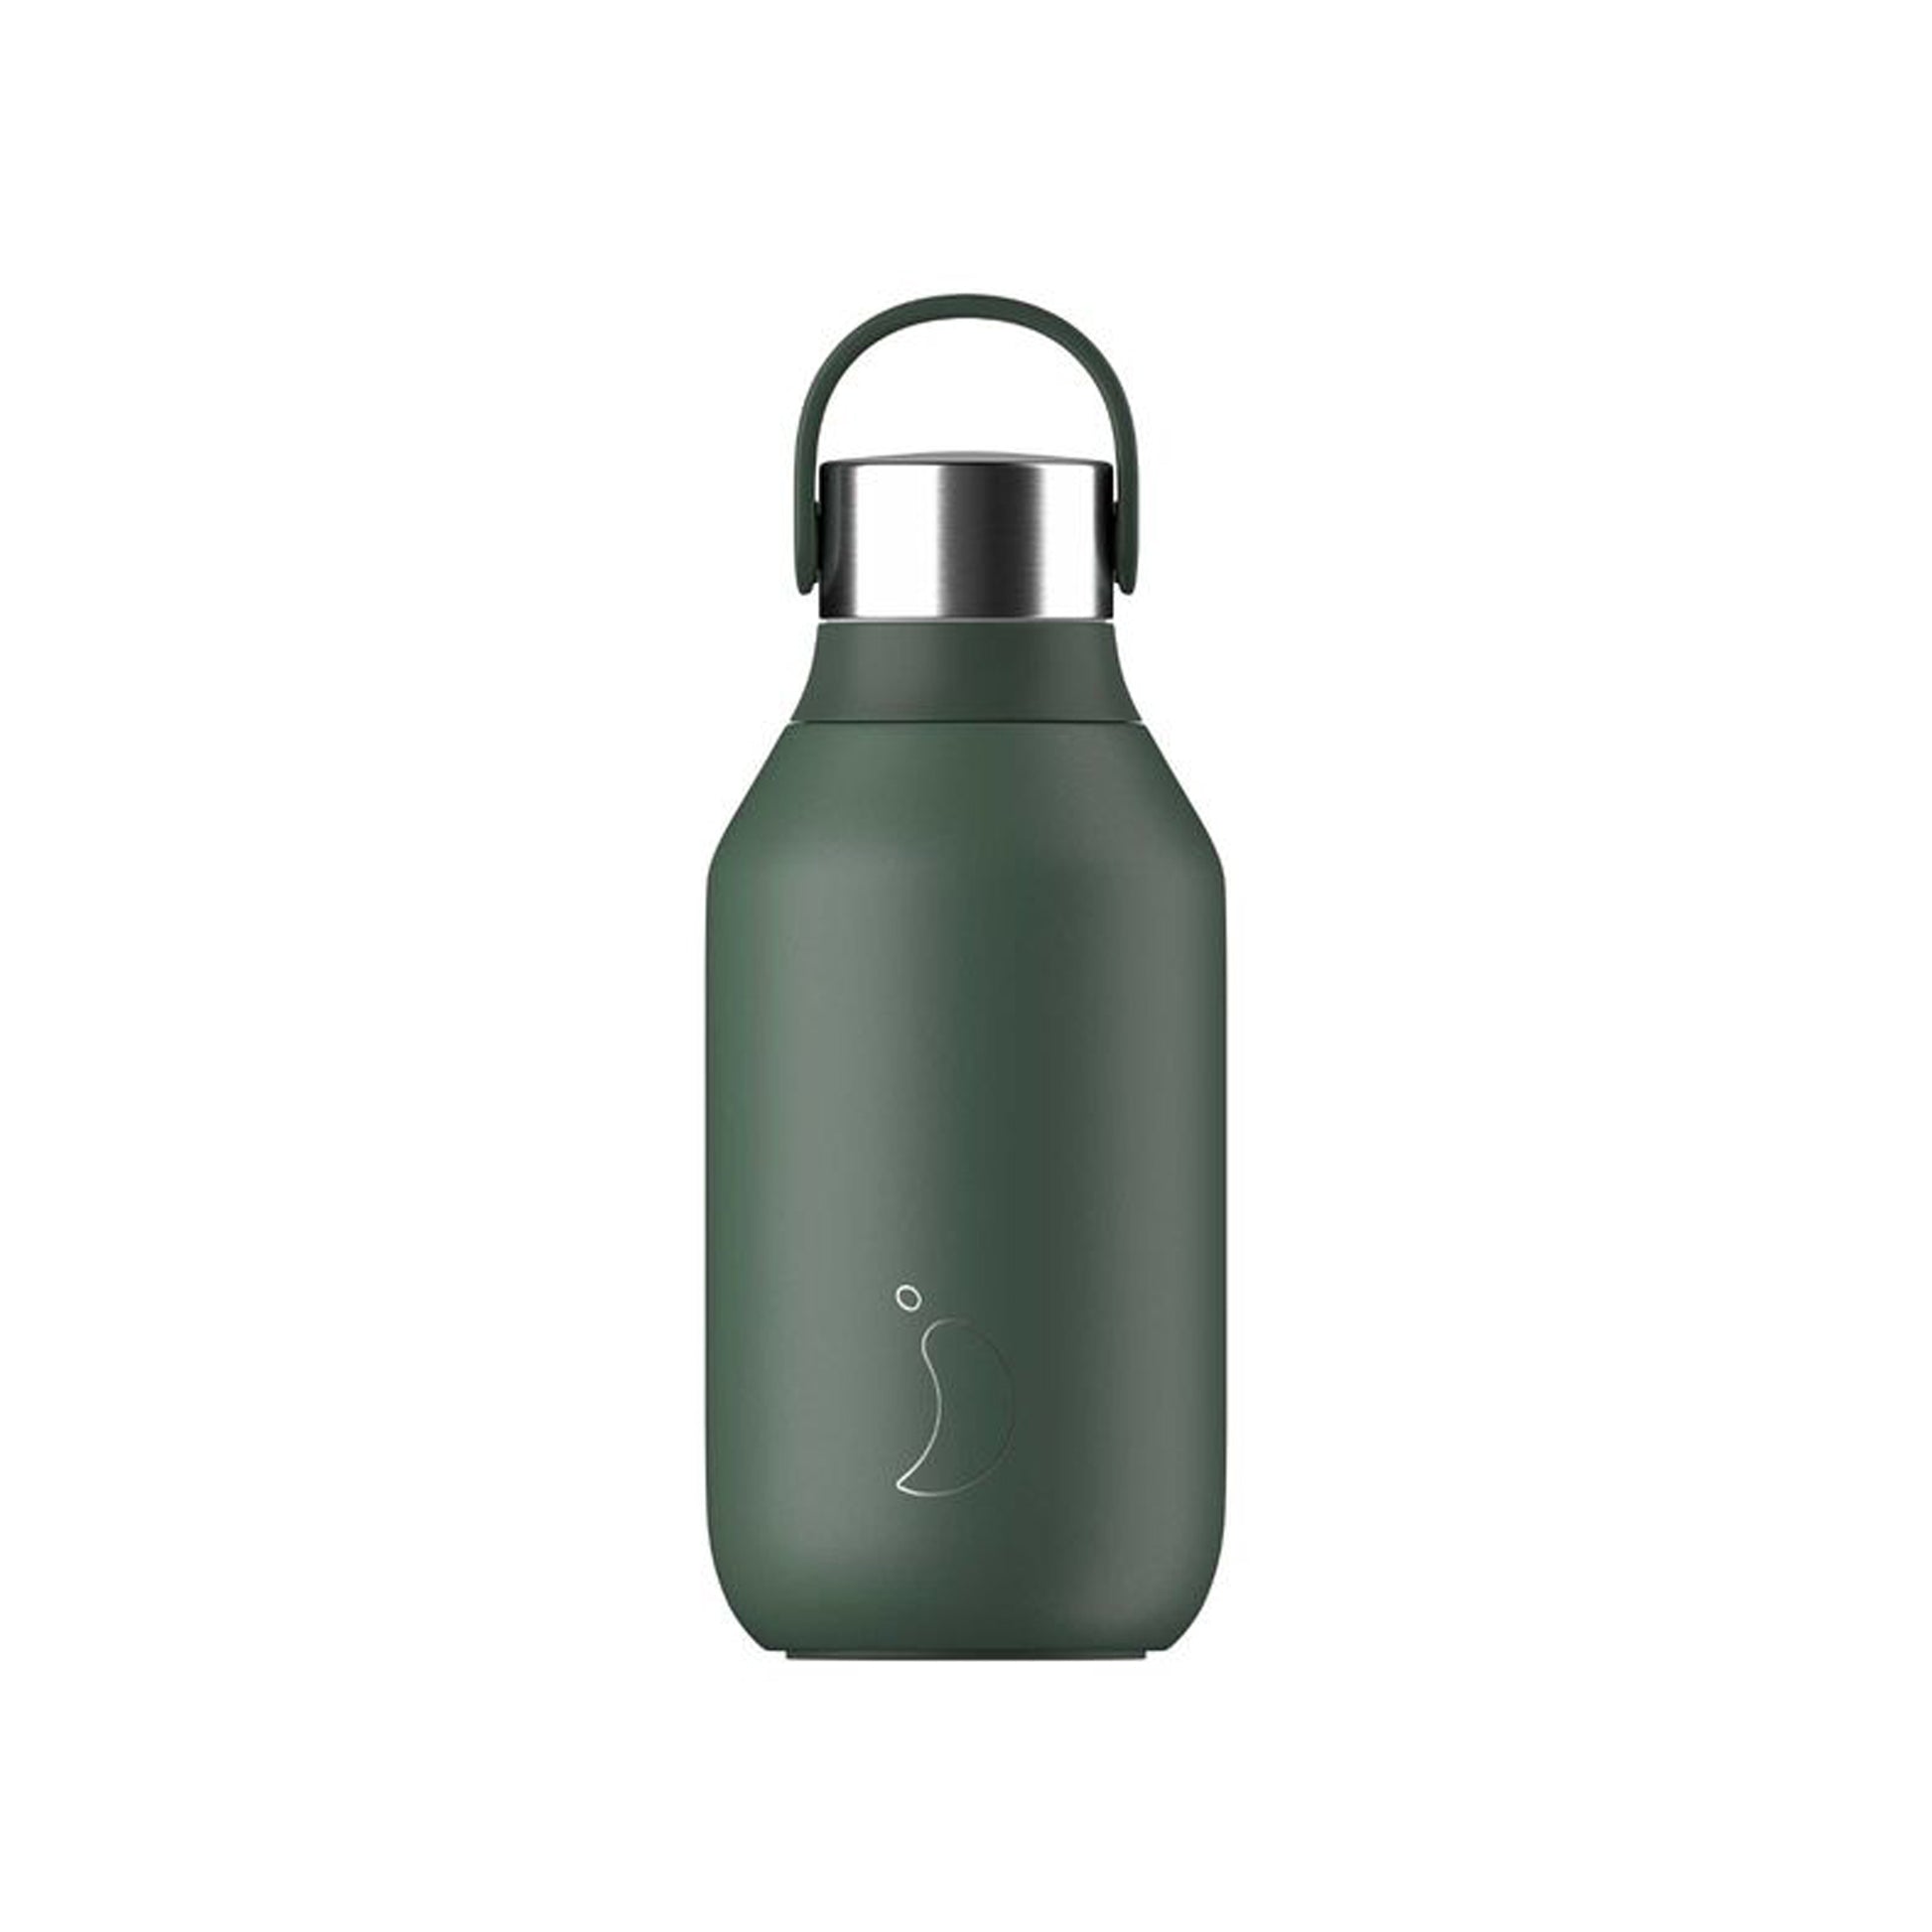 chillys bottle series 2. 350ml size in pine green